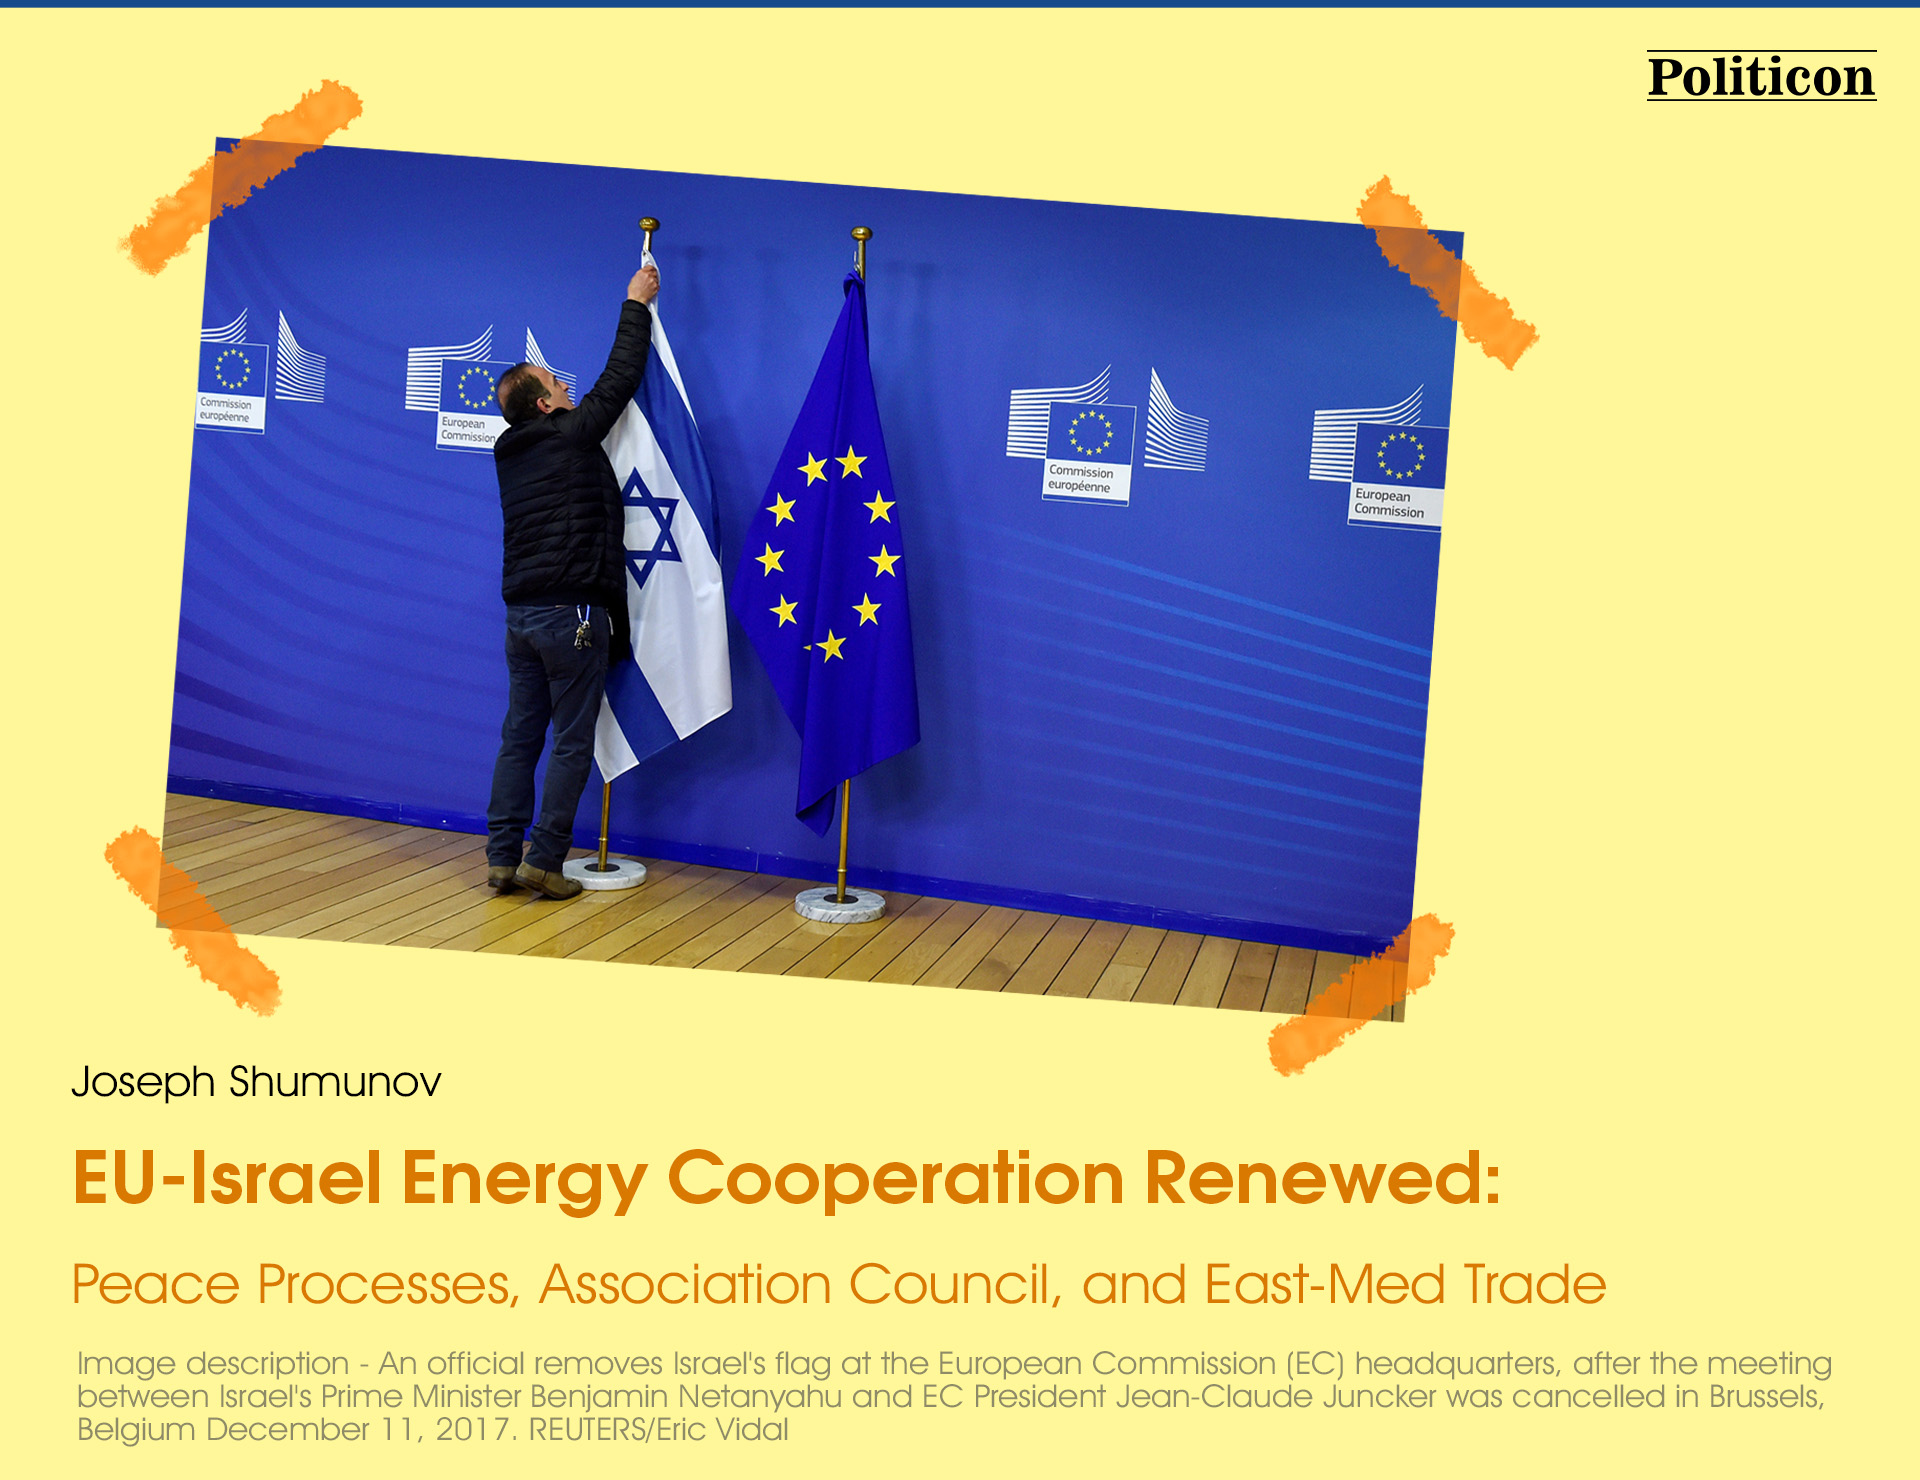 EU-Israel Energy Cooperation Renewed: Peace Processes, Association Council, and East-Med Trade